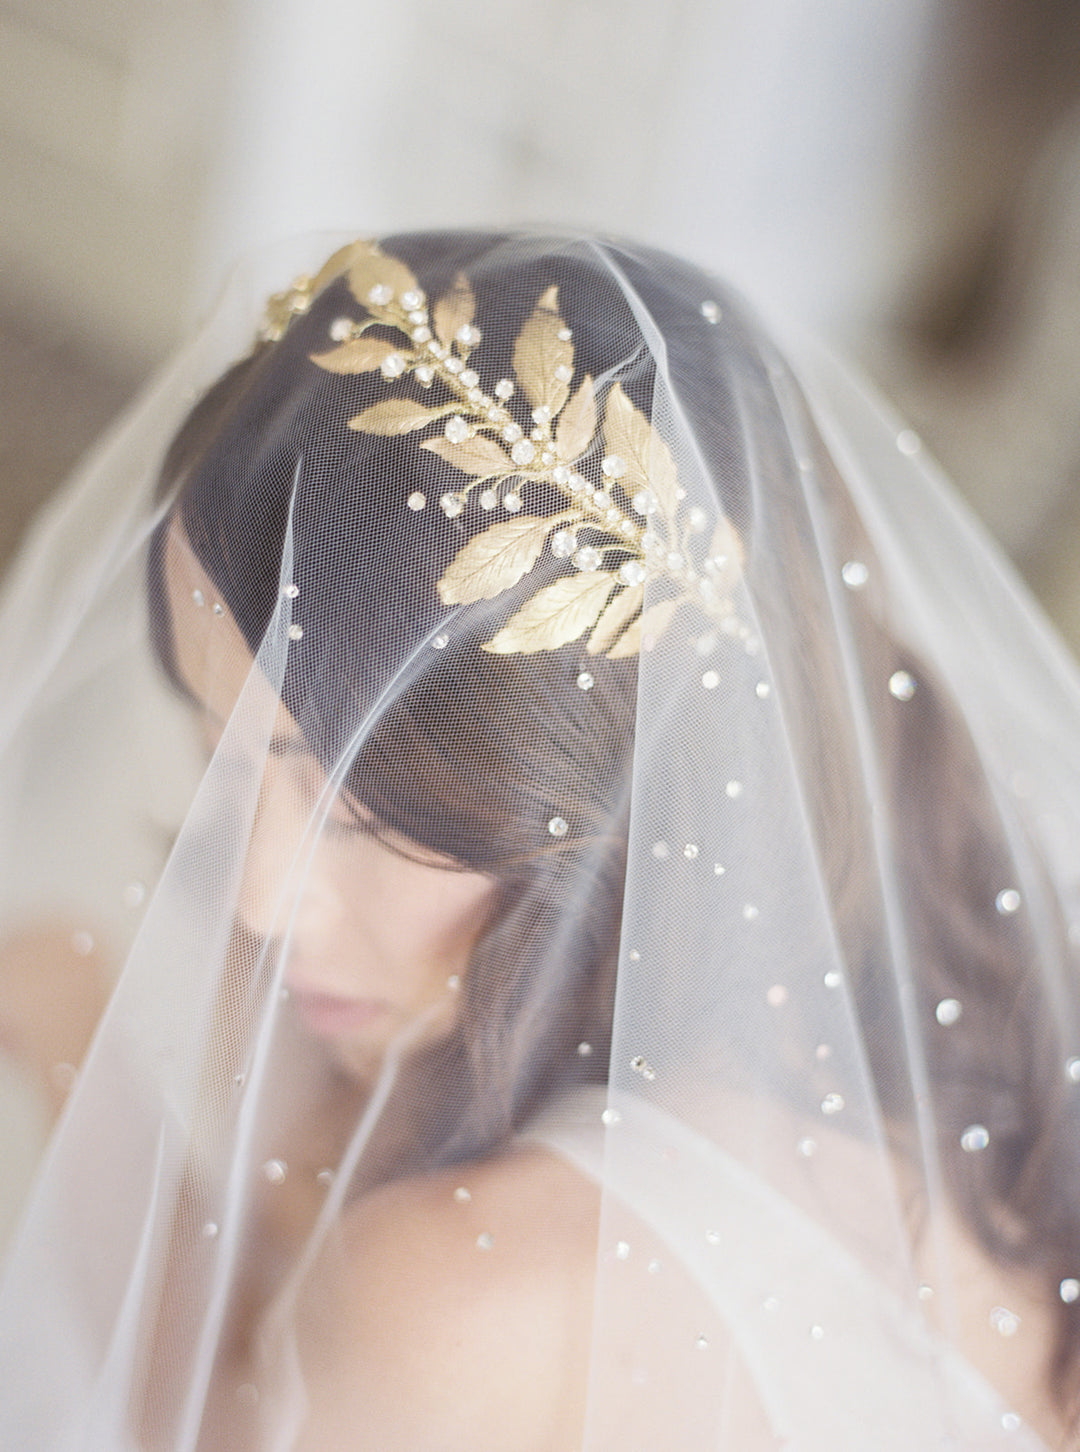 How stunning is our bride glowing in her statement crystal headpiece and  veil?!